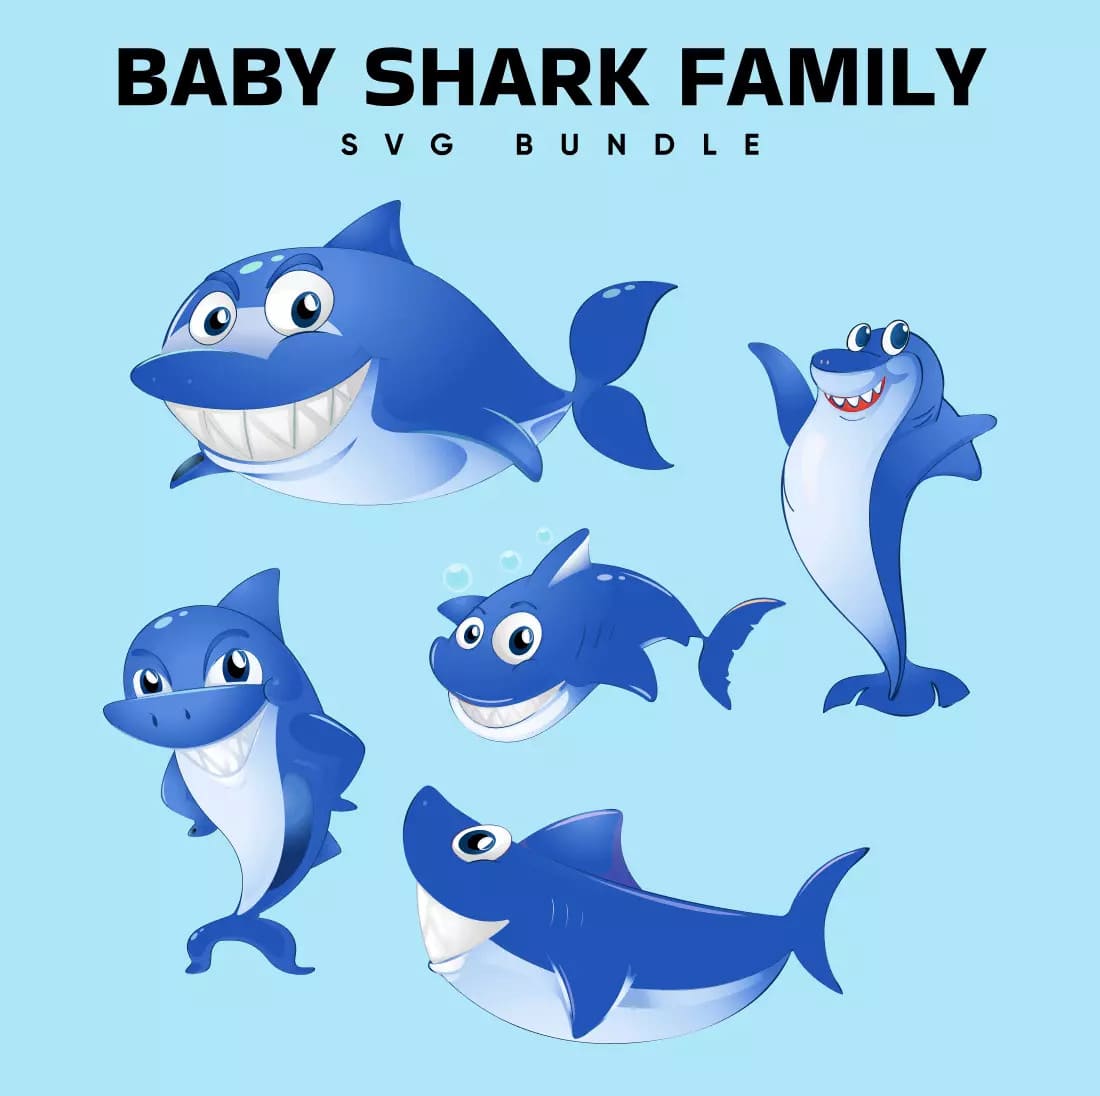 Baby Shark Family SVG Bundle Preview image.